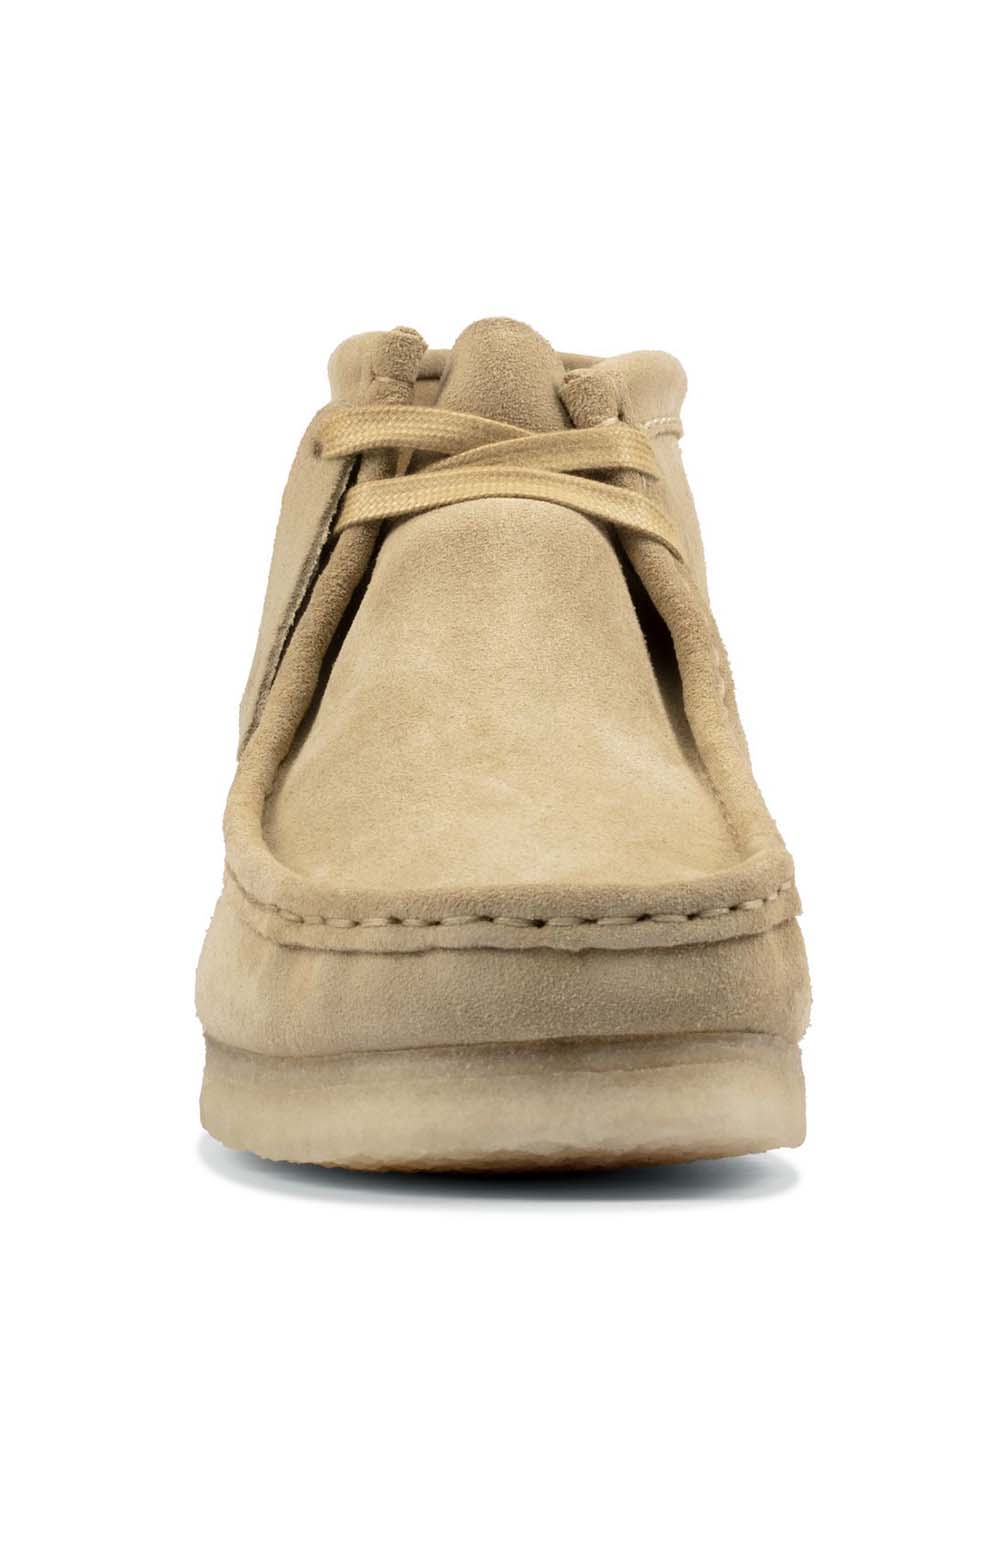  Side view of the Men's Wallabee Boot in Maple Suede 